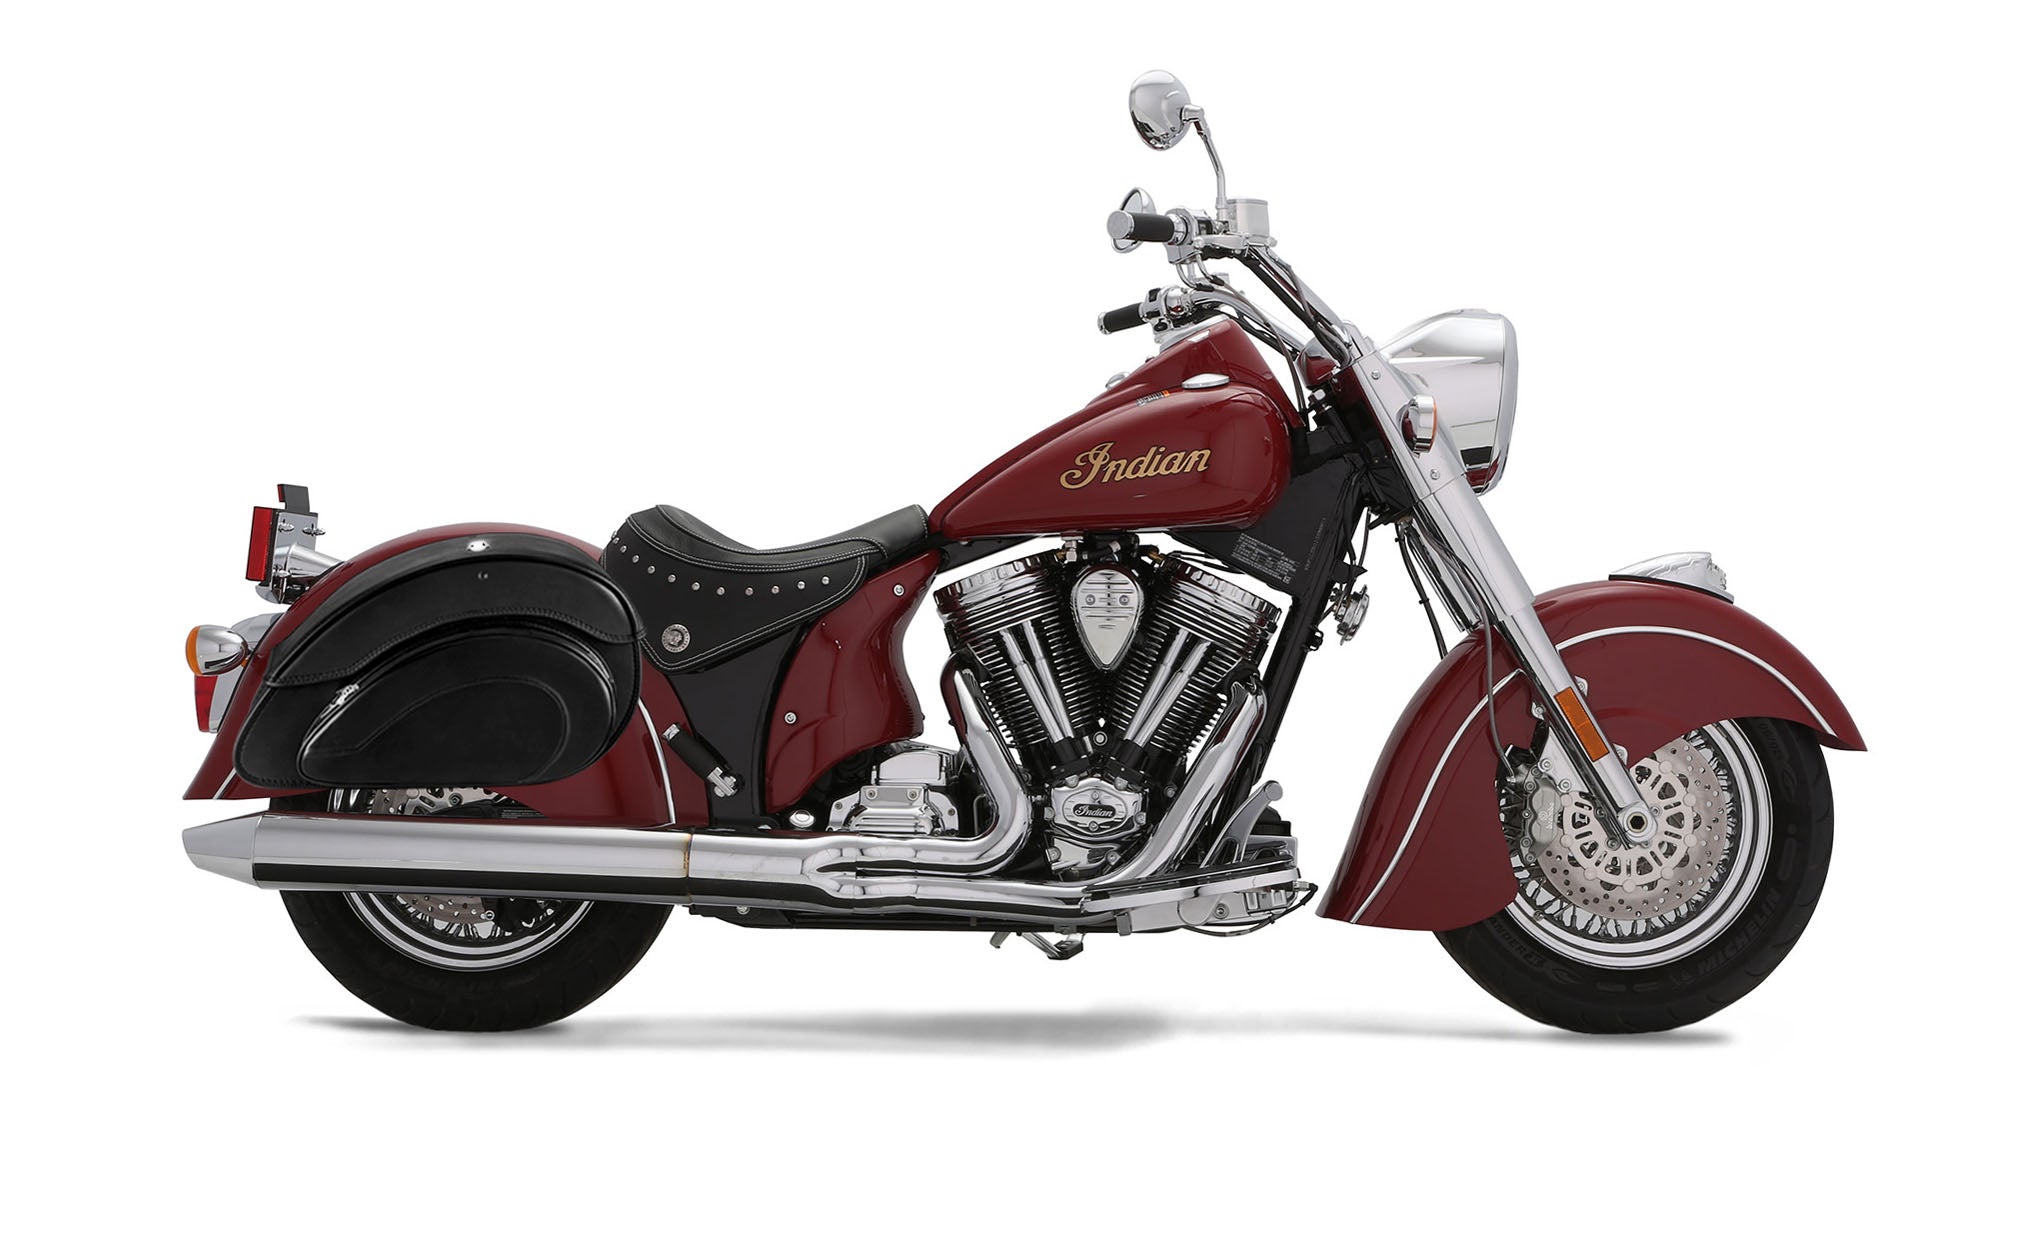 Viking Overlord Large Indian Chief Deluxe Leather Motorcycle Saddlebags on Bike Photo @expand